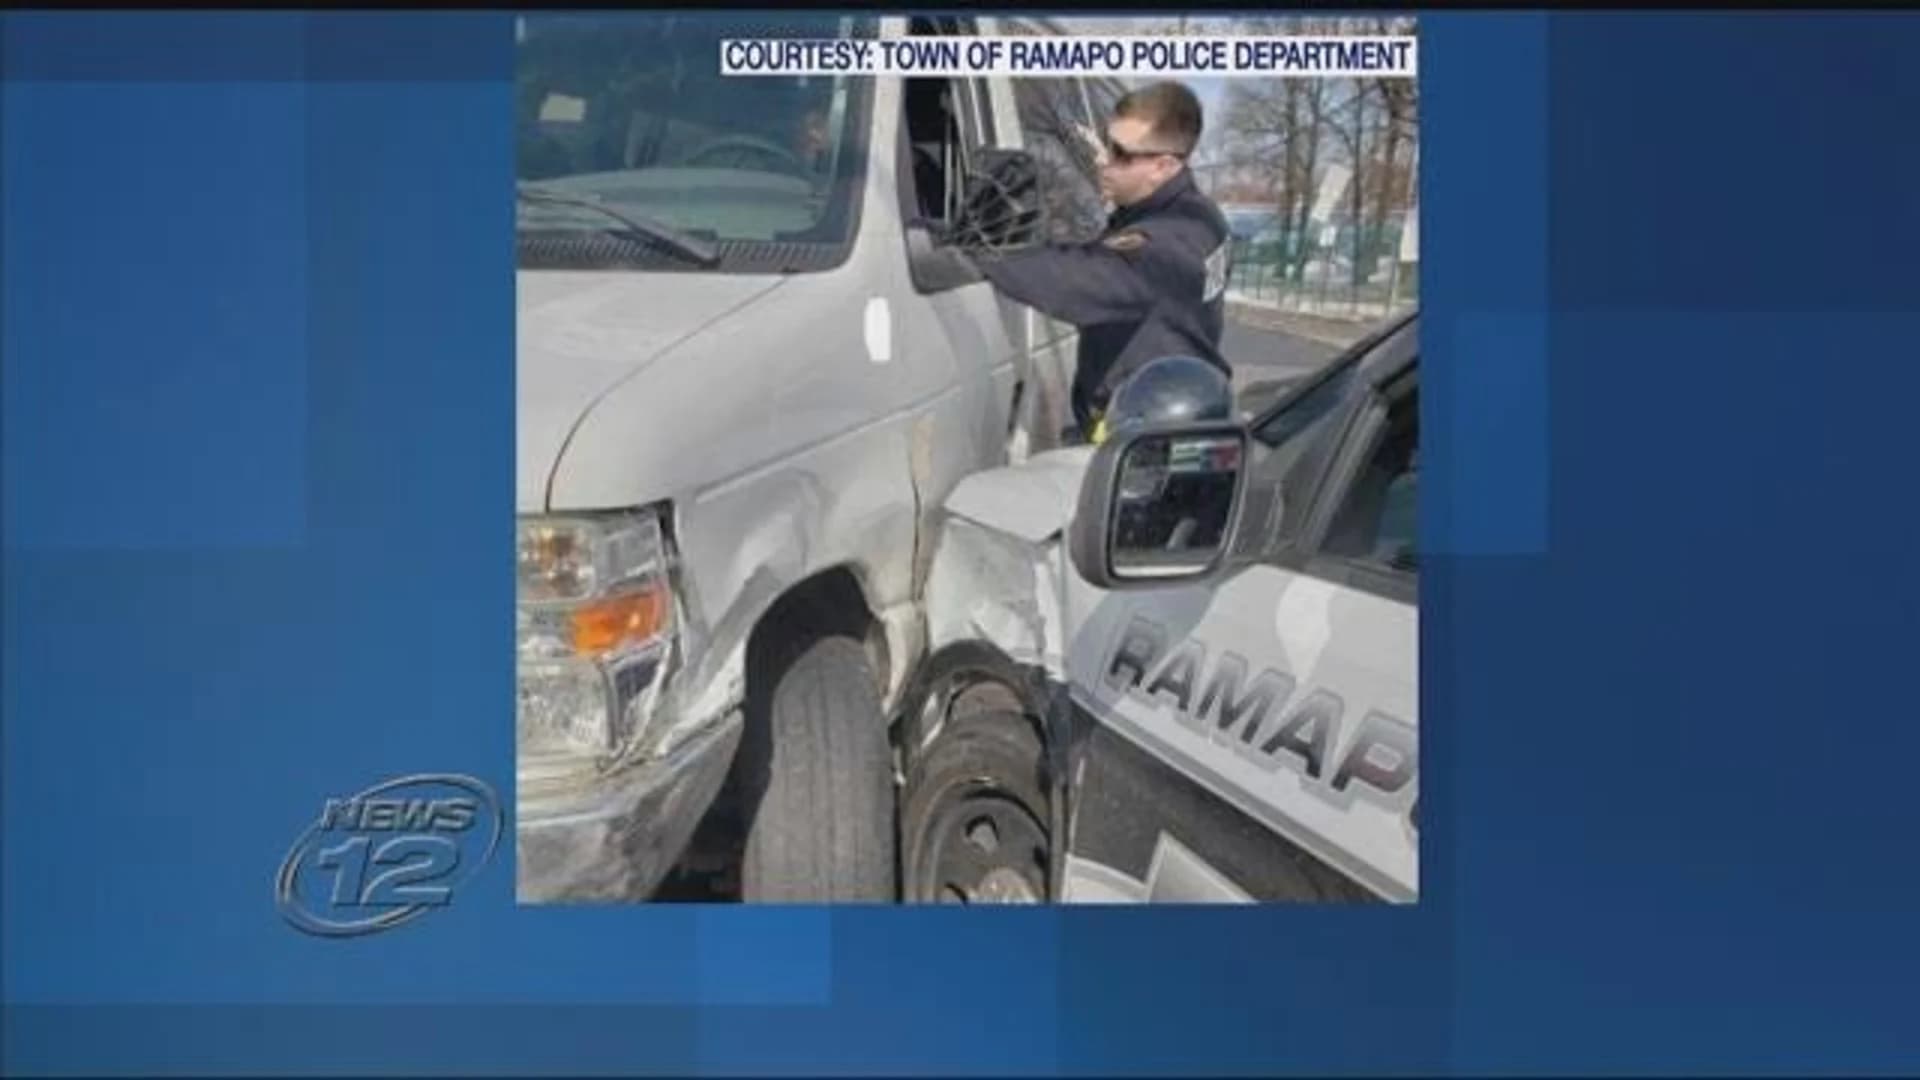 Woman turns into police car's path, causes crash in Ramapo